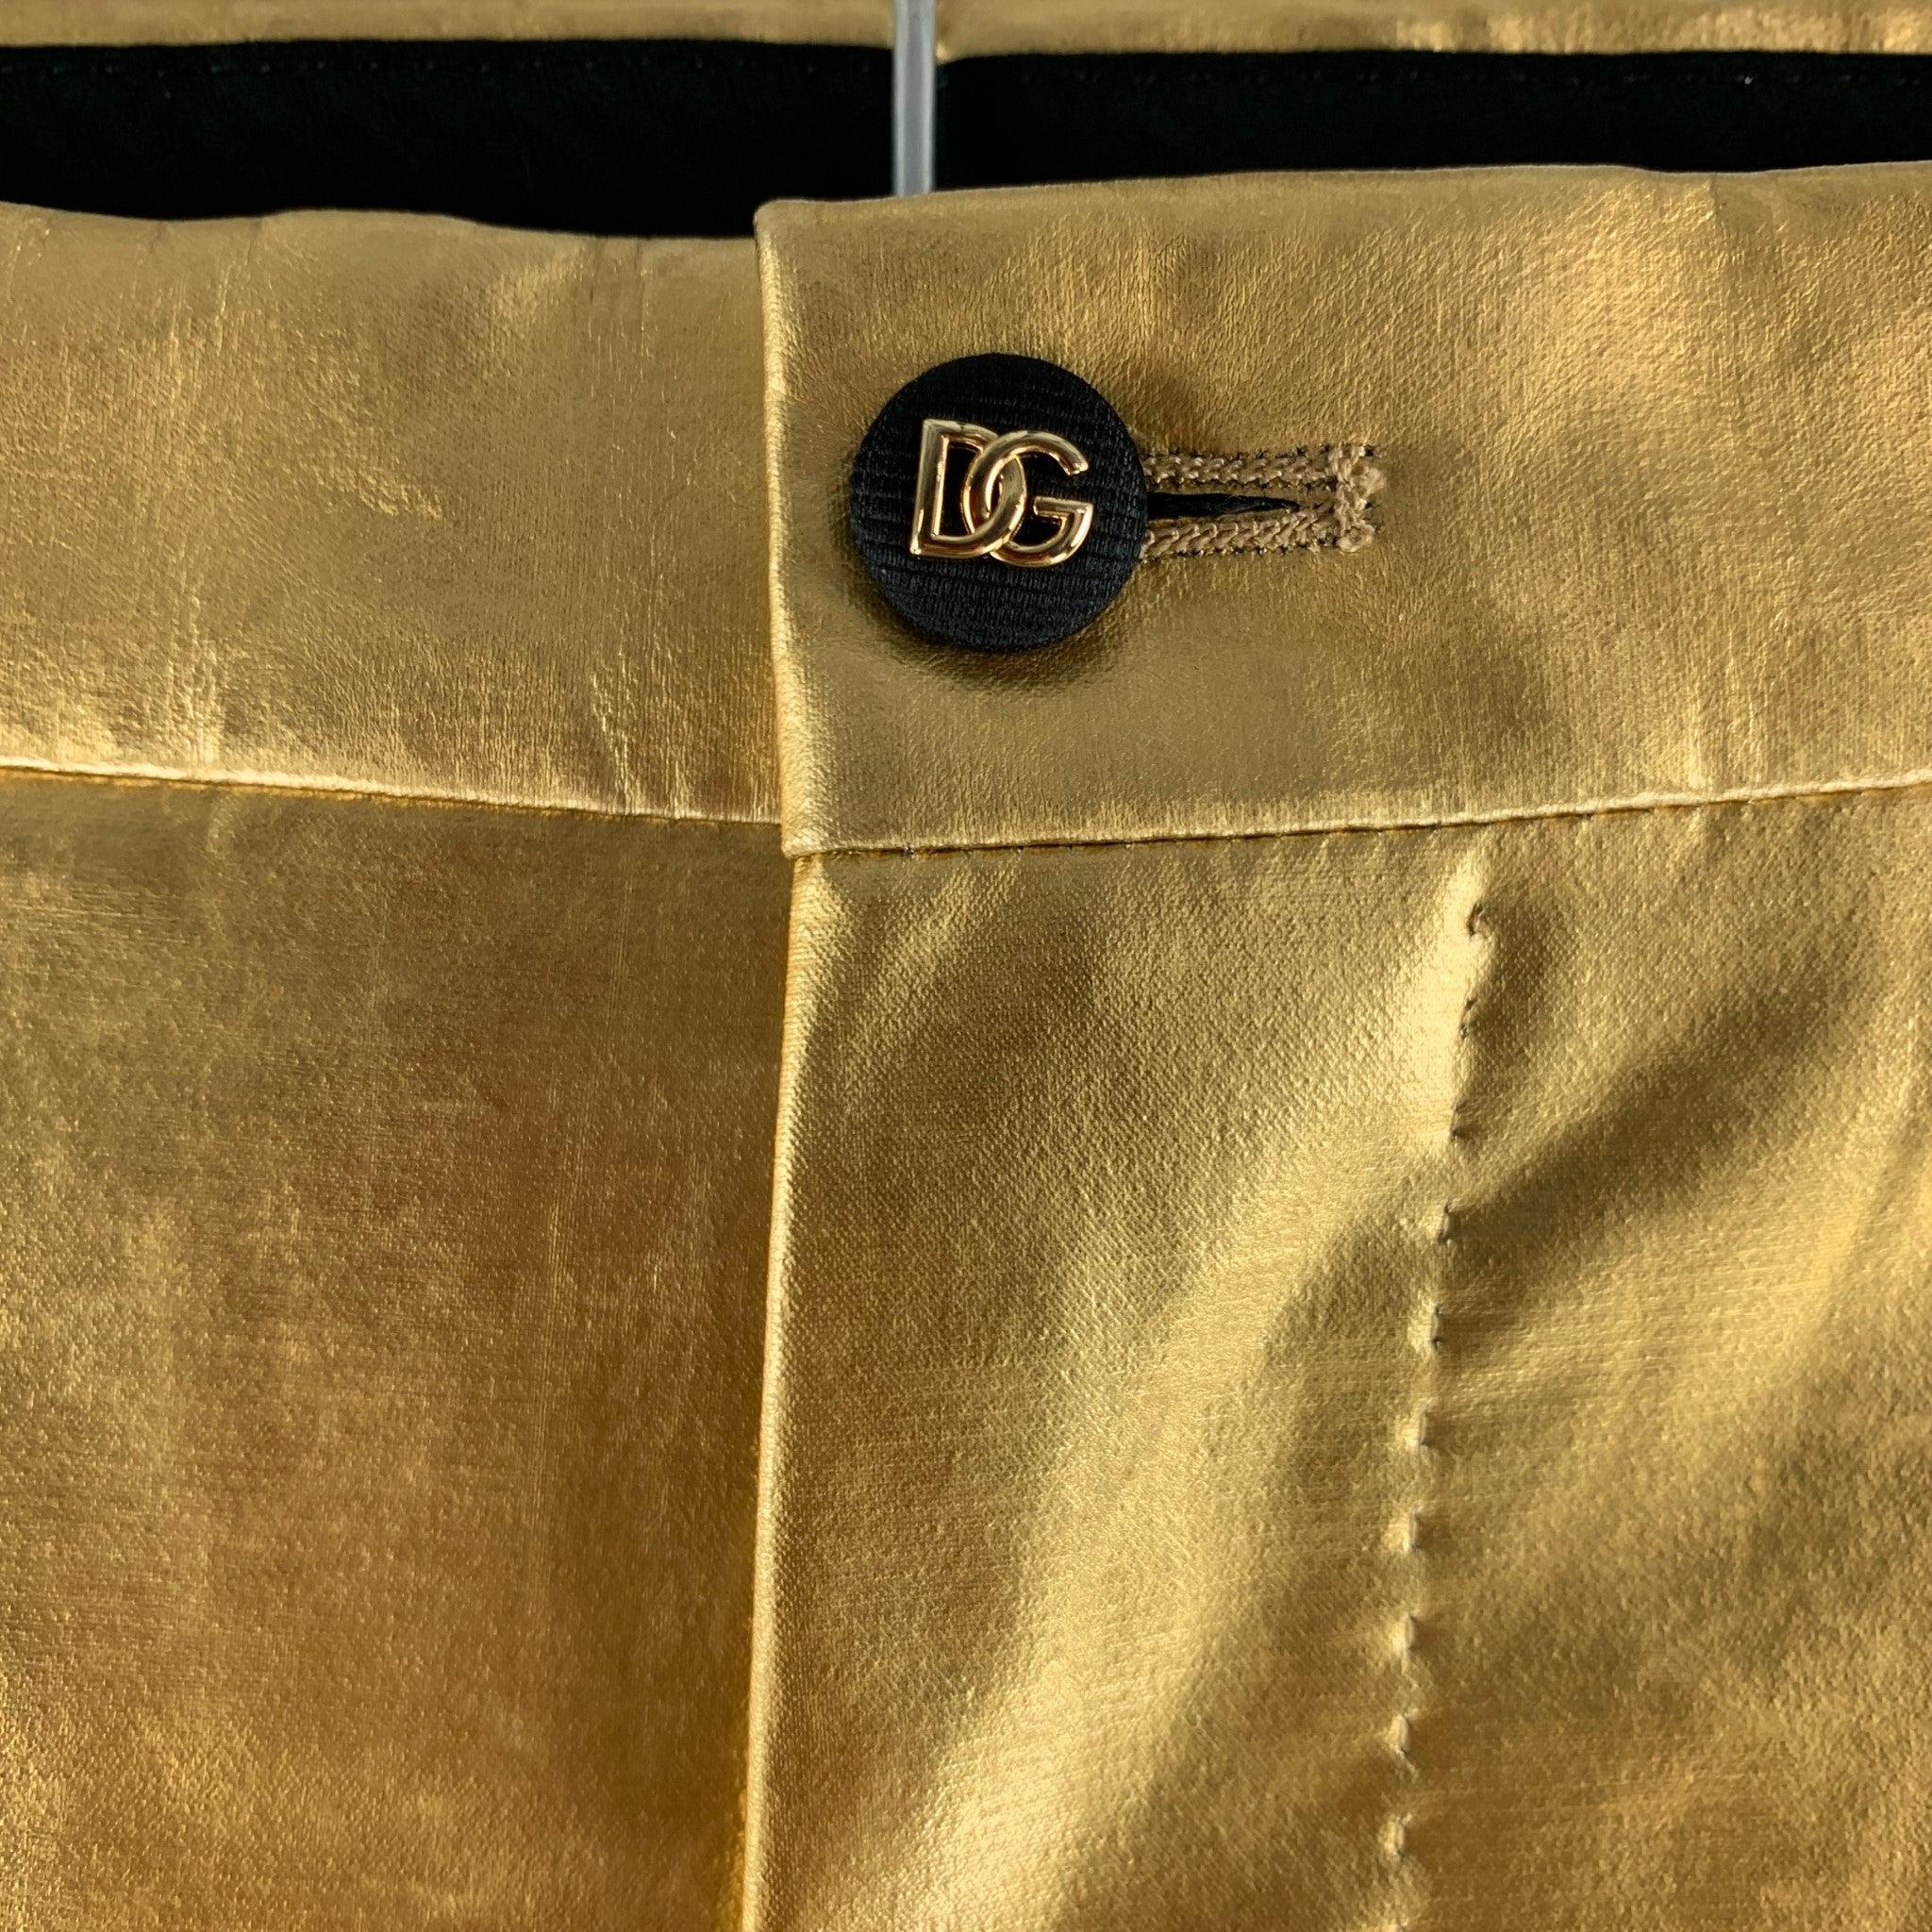 D&G by DOLCE & GABBANA dress pants comes in a gold tone polyamide and elastane material featuring a jeans cut, slit pockets, and a zipper fly closure. Made in Italy.Excellent Pre- Owned Condition. 

Marked:   52 

Measurements: 
  Waist: 37 inches